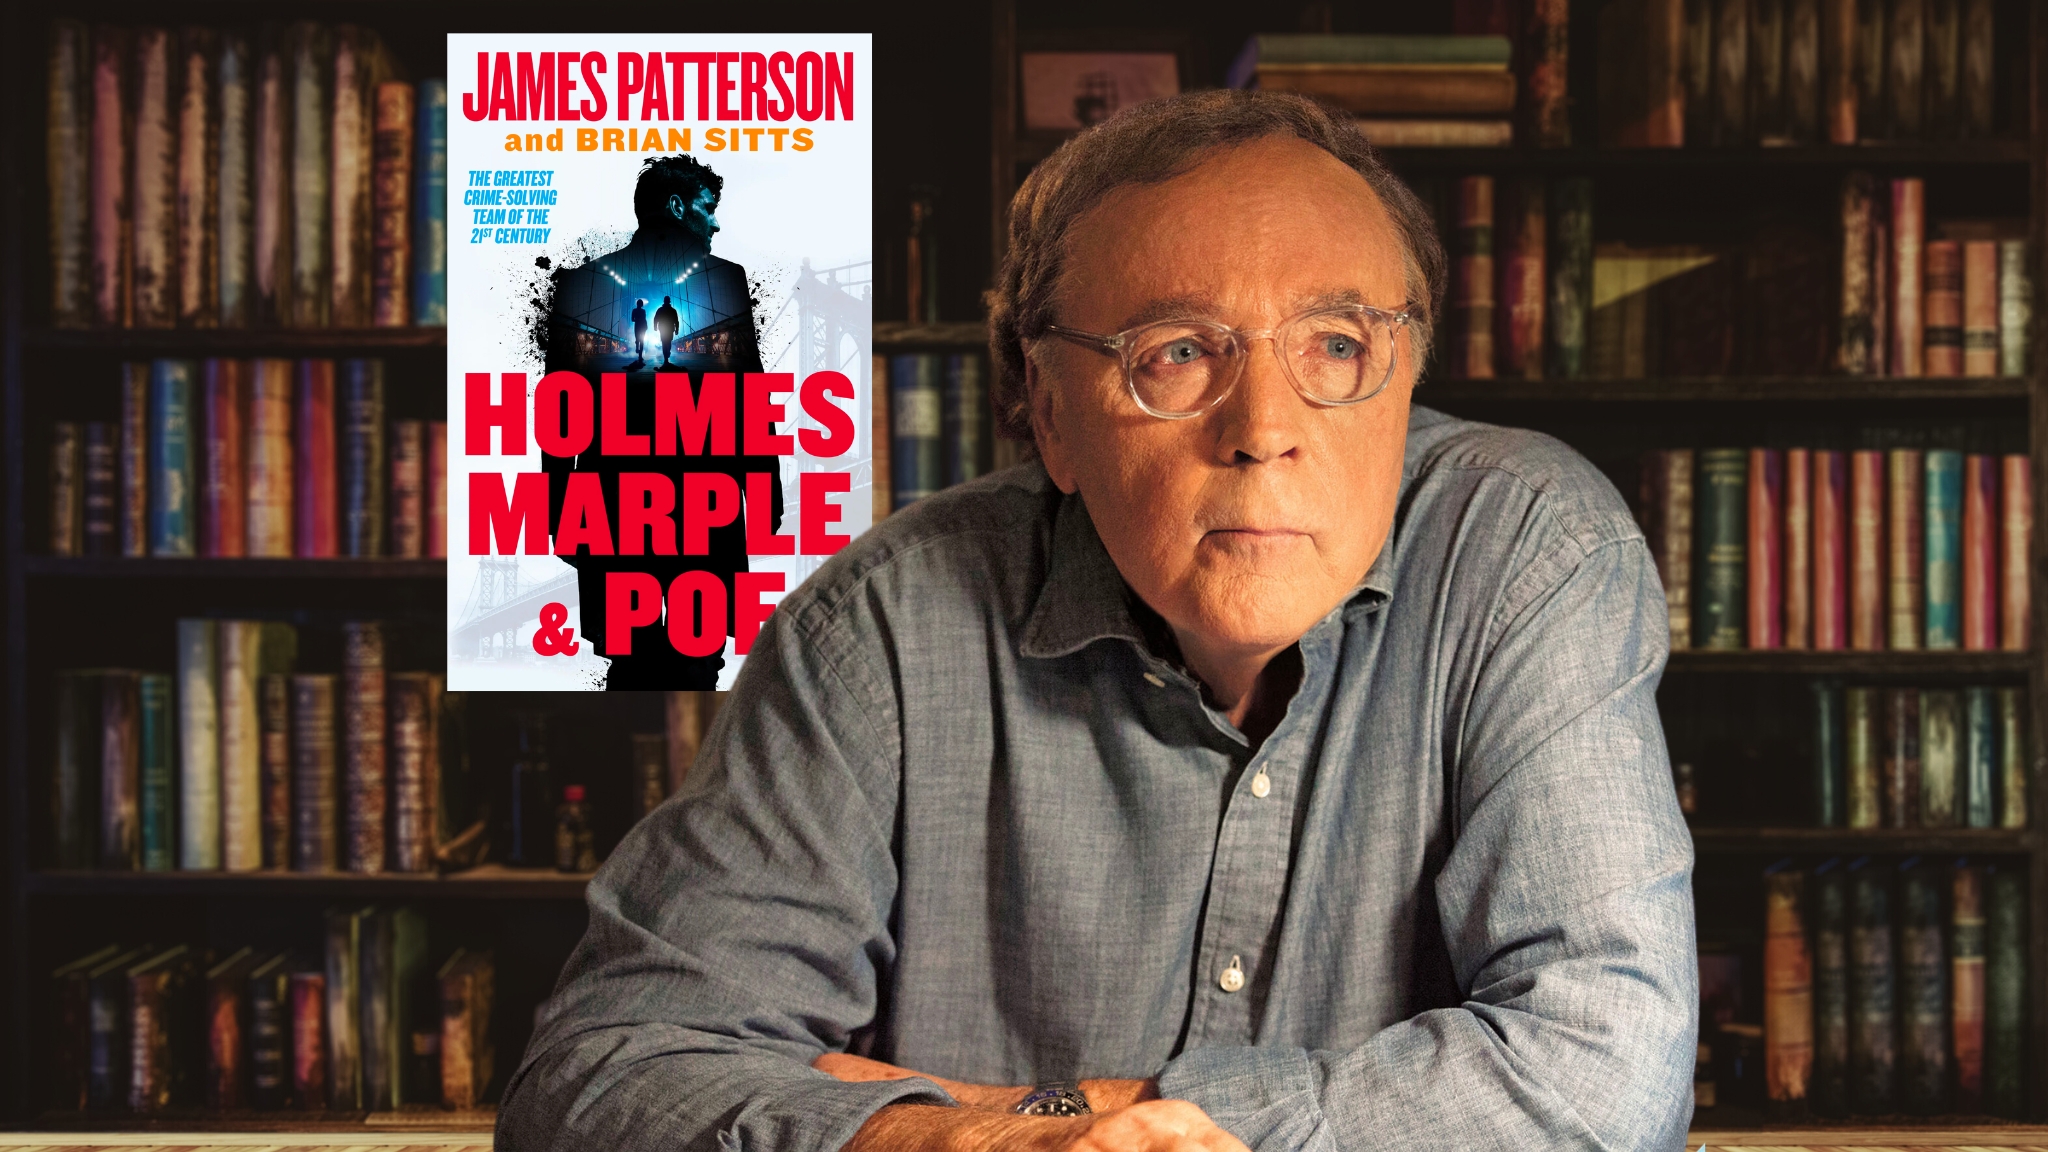 James Patterson and Brian Sitts - Holmes Marple & Poe